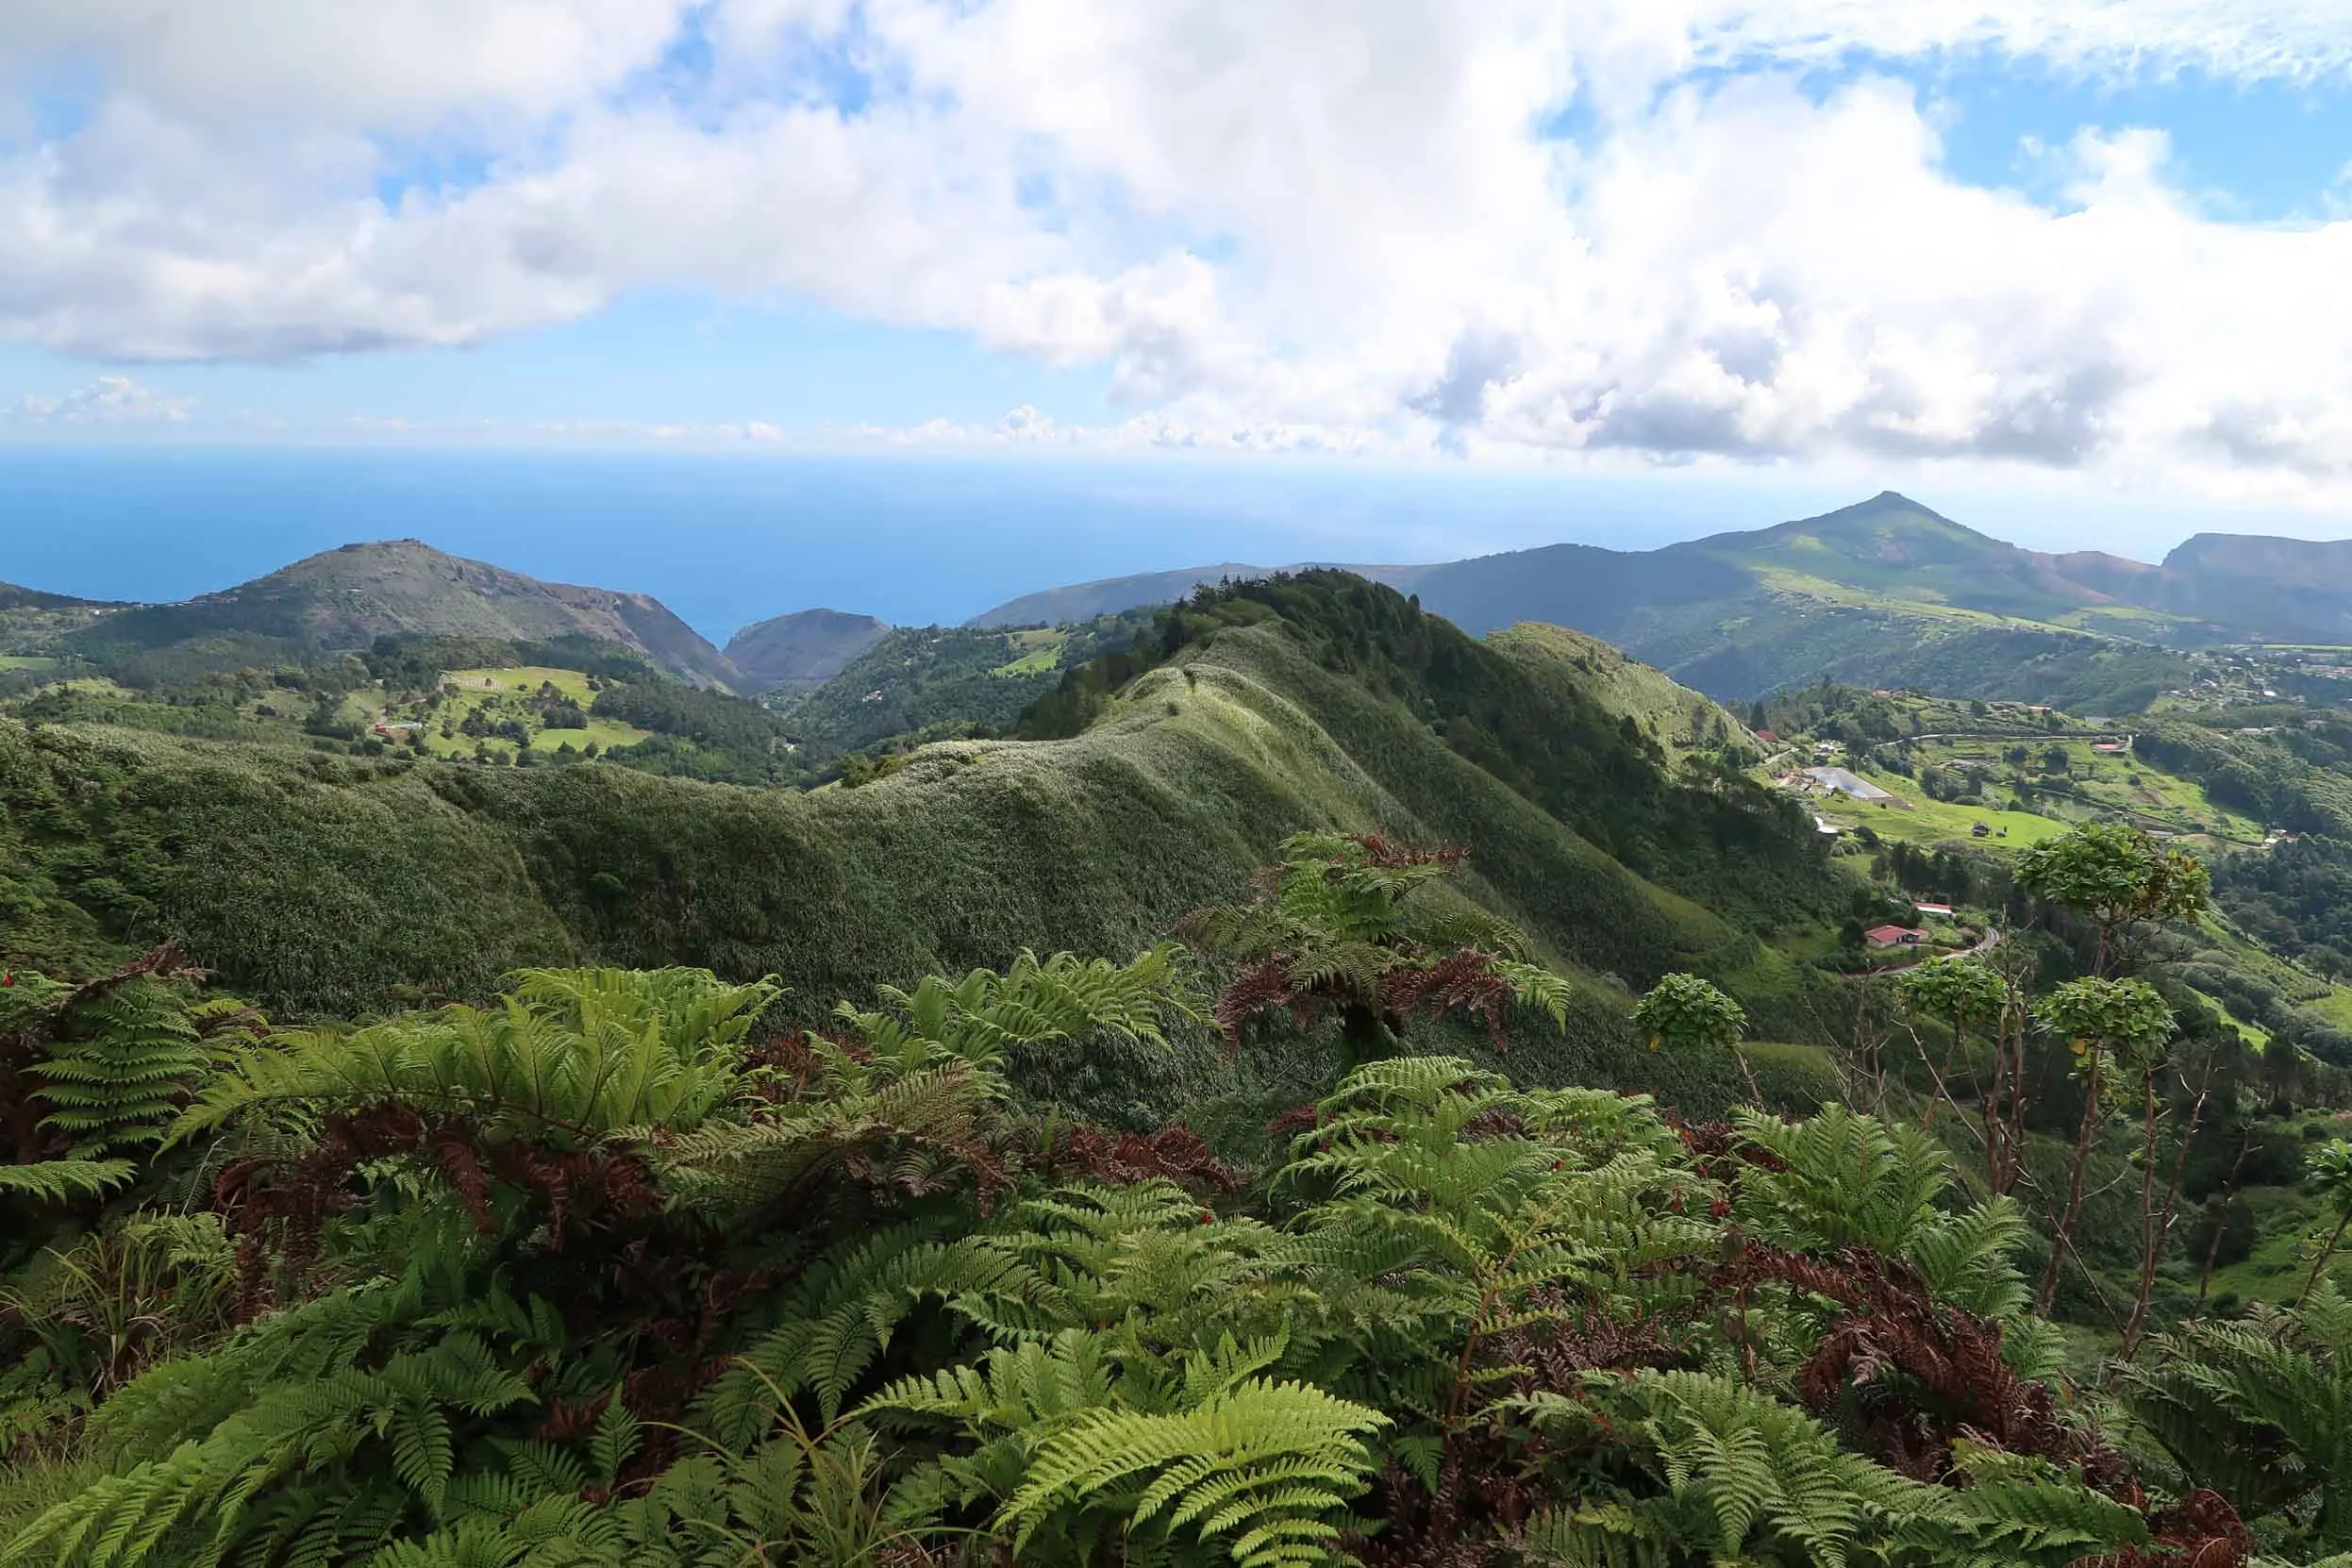 The view of Diana's Peak, St Helena Island, surrounded by lush greenery and cloudy blue skies.